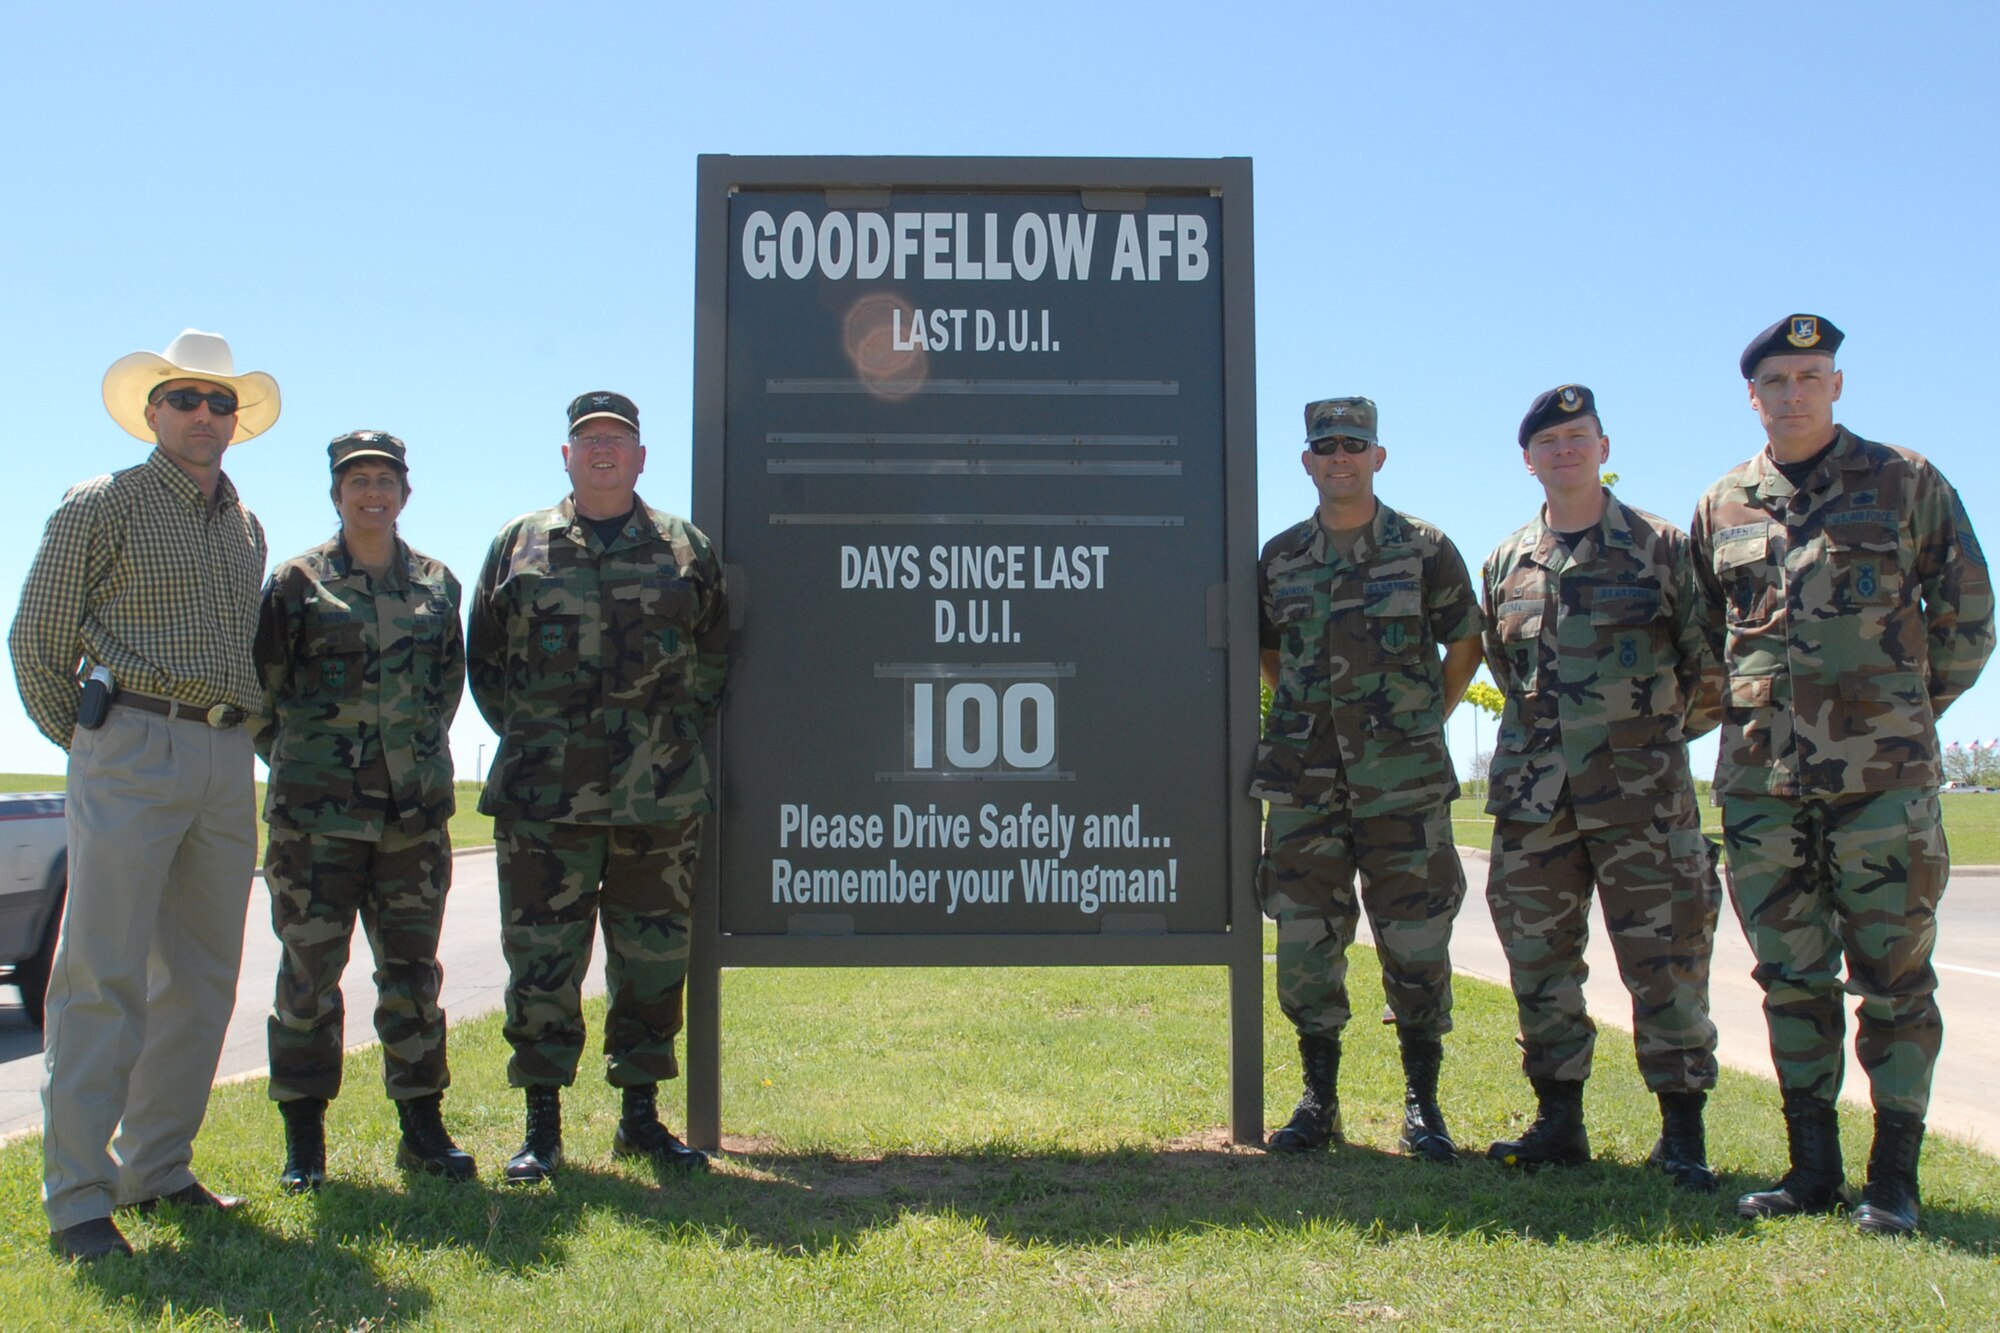 Members of Team Goodfellow’s leadership pose Wednesday in front of the sign marking 100 days since the last DUI on Goodfellow. From left to right are Paul Buckingham, Goodfellow’s Sexual Assault Response Coordinator; Col. Merrily Madero, 17th Training Wing vice commander; Col. Richard Ayres, 17 TRW commander; Col. Stephen Czerwinski, 17th Mission Support Group commander; Lt. Col. Kenneth O’Neil, 17th Security Forces Squadron commander, and Chief Master Sgt. Michael Murphy, 17 SFS superintendent.

“This milestone is a tribute to our wing officer and NCO leaders, who have worked so hard to get the message out about drunk driving, and it’s also a reflection on the caliber of Airmen we have on this base,” Col. Ayres said. “I encourage everyone to not let down their guard and make sure we keep this streak going,” the commander continued. (U.S. Air Force photo by Staff Sgt. Angela Malek)